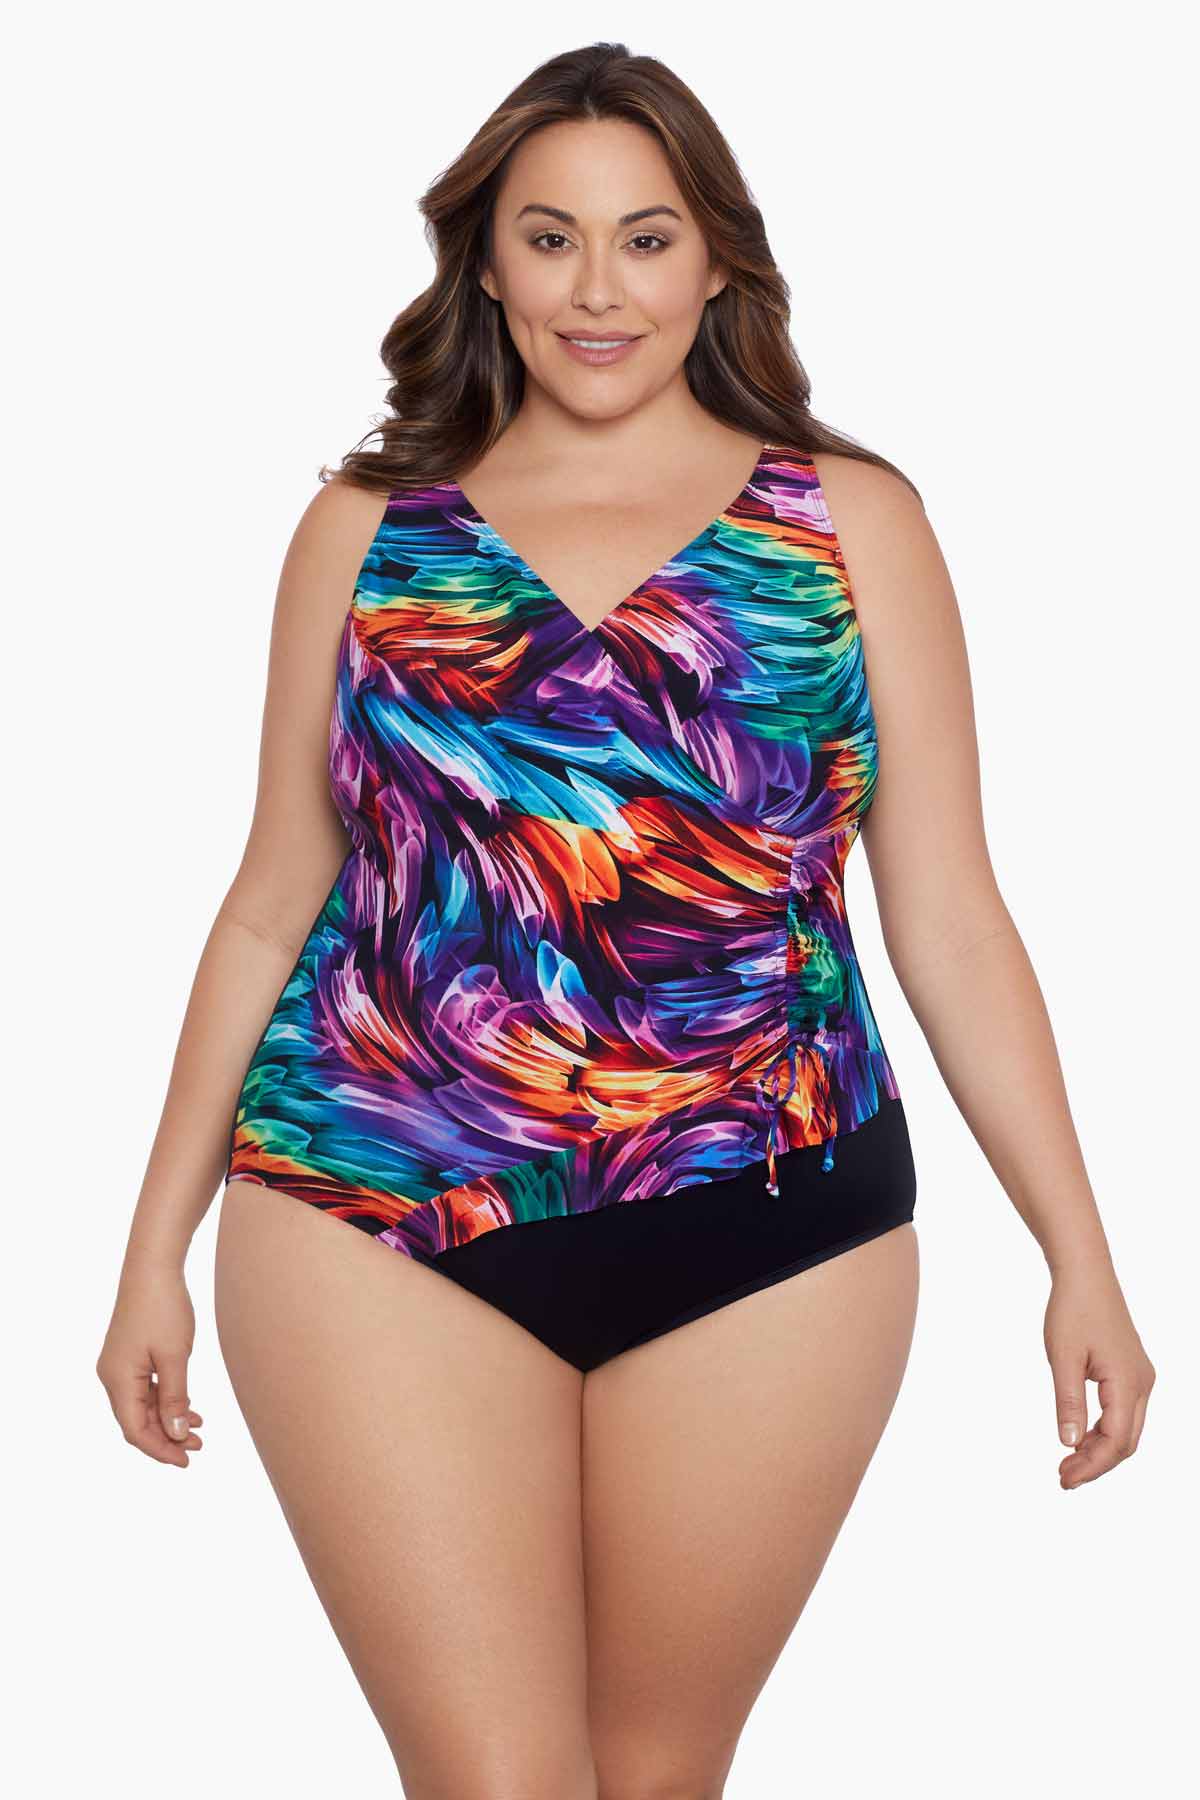 Women's Plus Size Swimsuits & Costumes